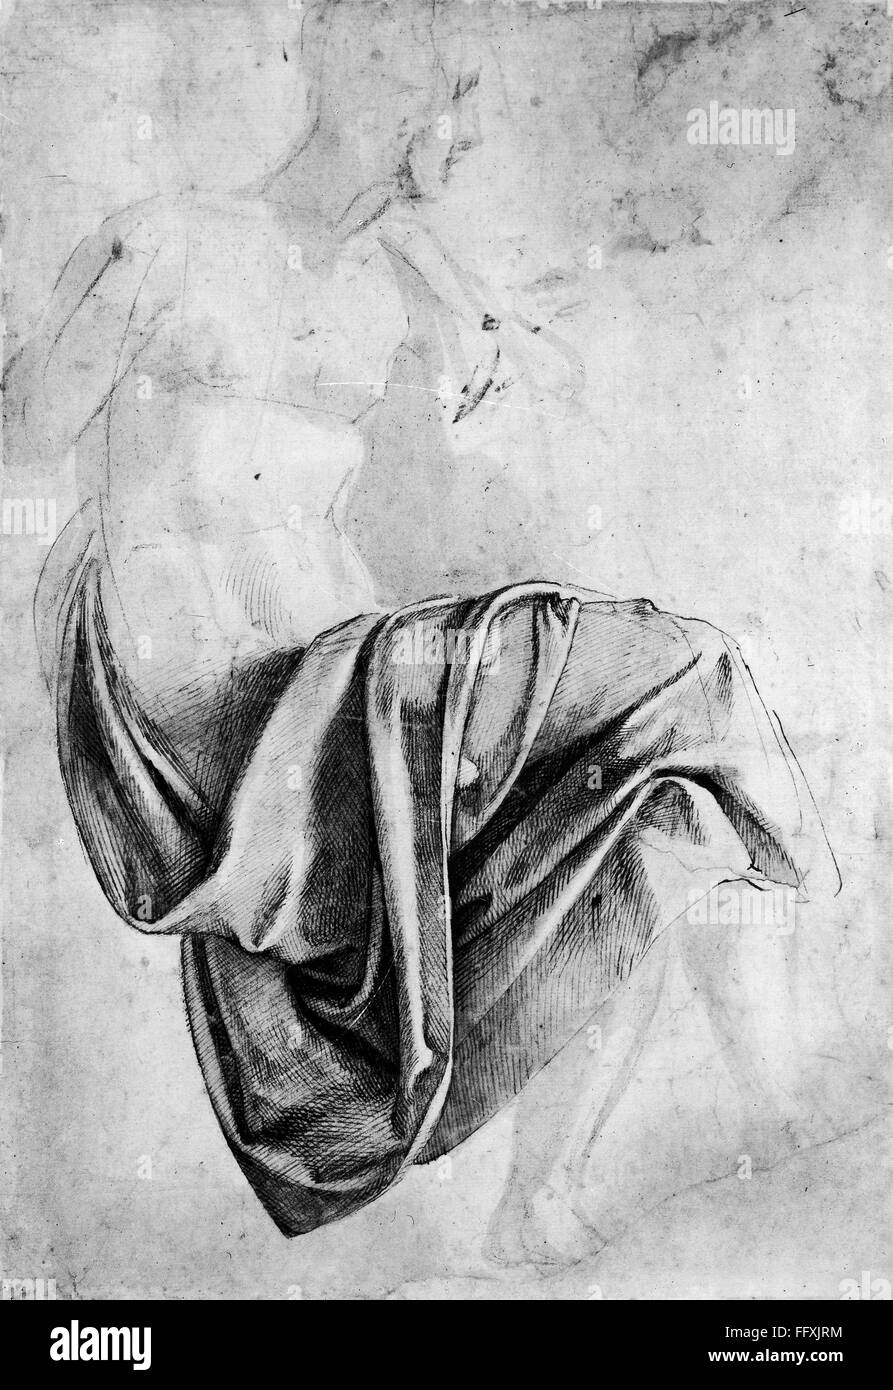 MICHELANGELO: STUDY. /nStudy of drapery for a seated figure. Preparatory sketch for the Erythraean Sibyl on the Sistine Chapel ceiling, by Michelangelo, c1508. Stock Photo